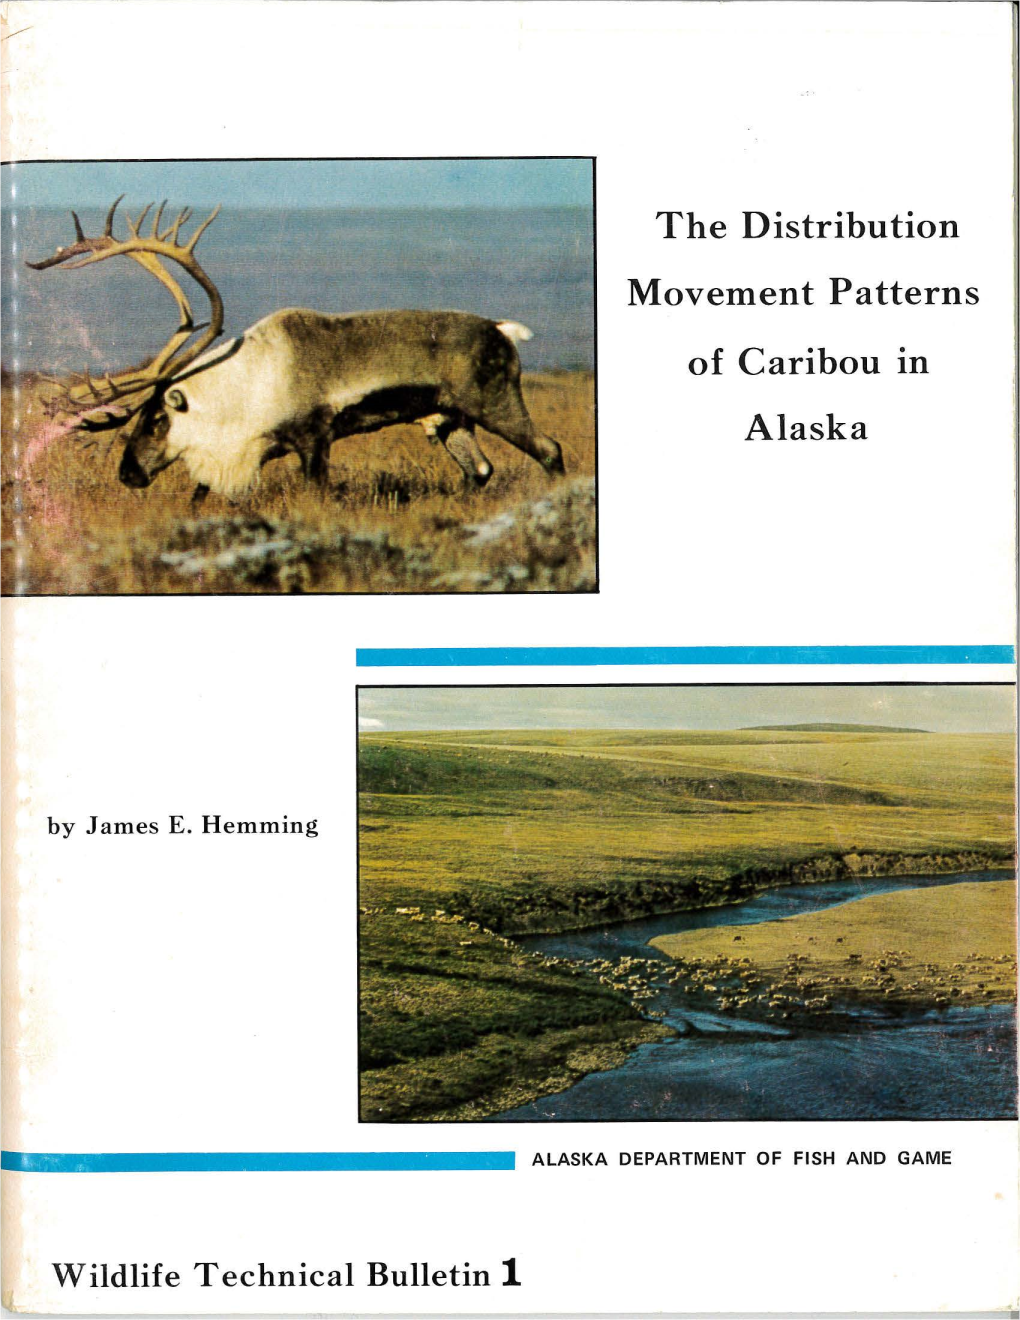 The Distribution and Movement Patterns of Caribou in Alaska